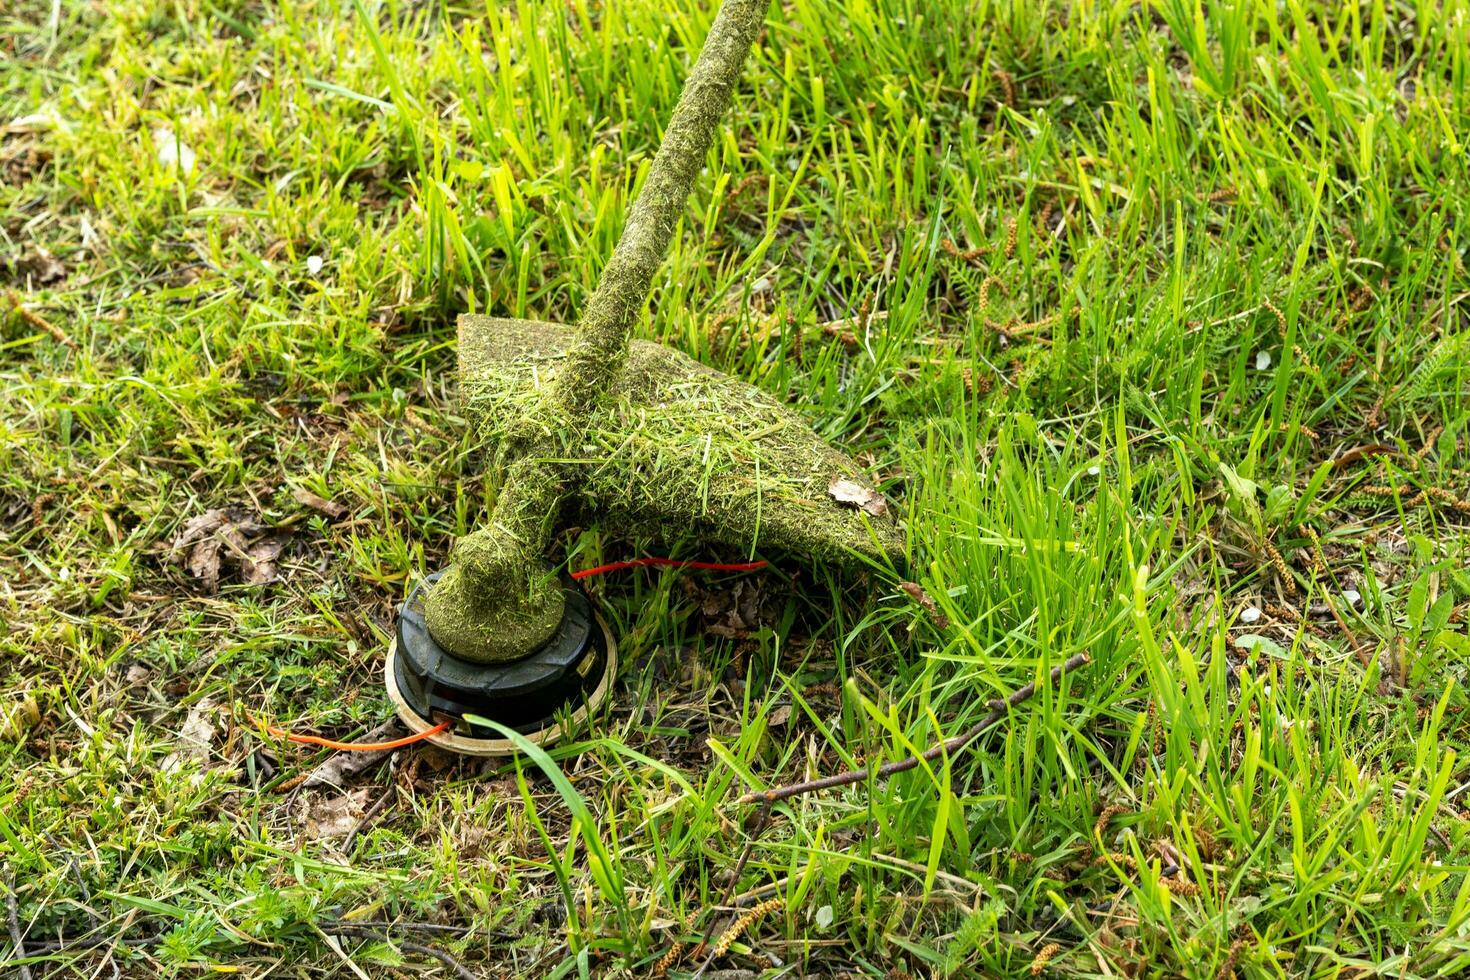 close-up of a grass trimmer during mowing. Landscaping concept photo